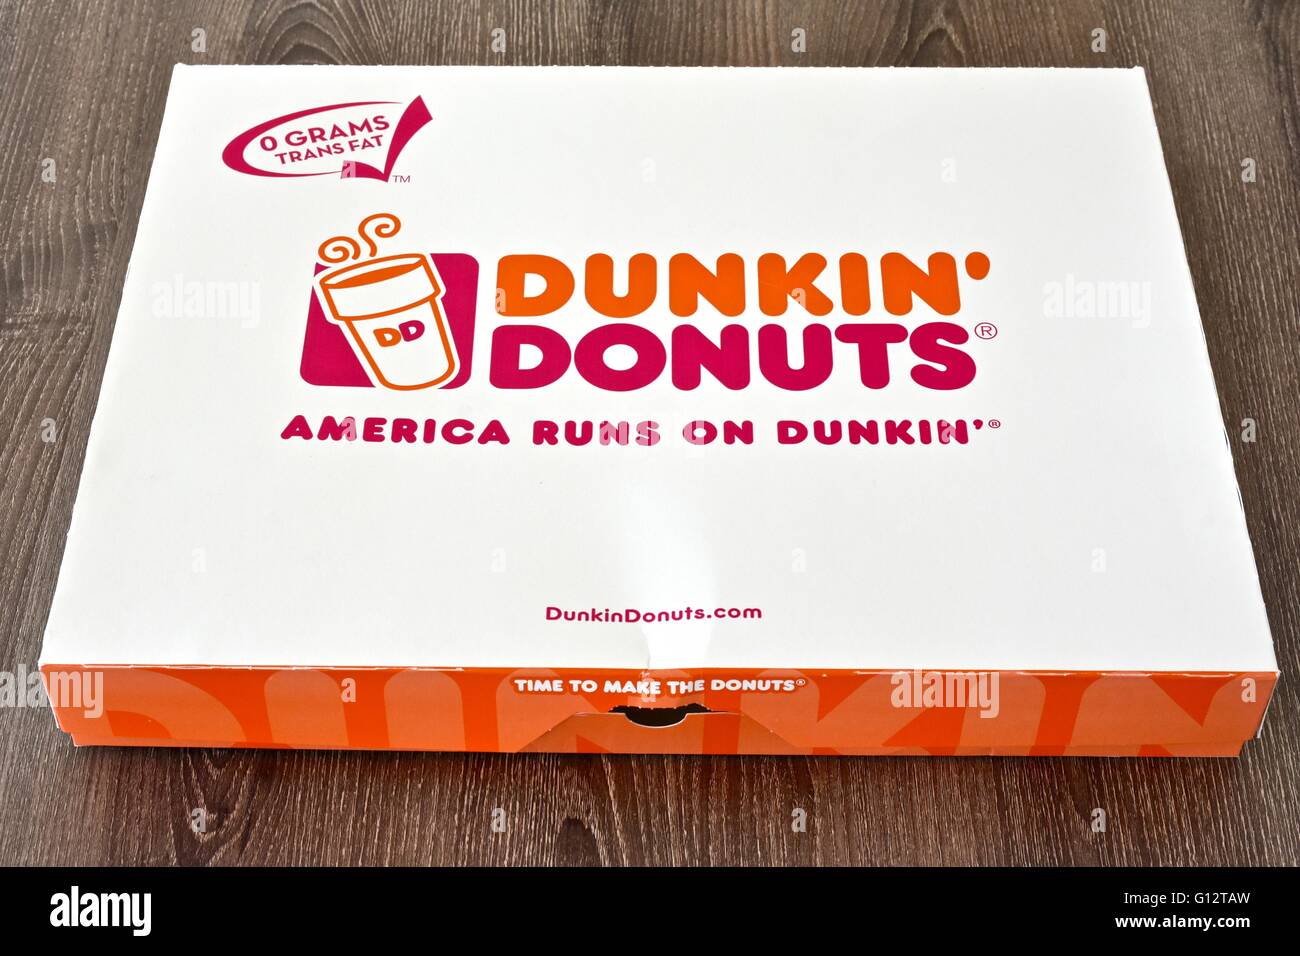 A box of Dunkin' Donuts Stock Photo - Alamy